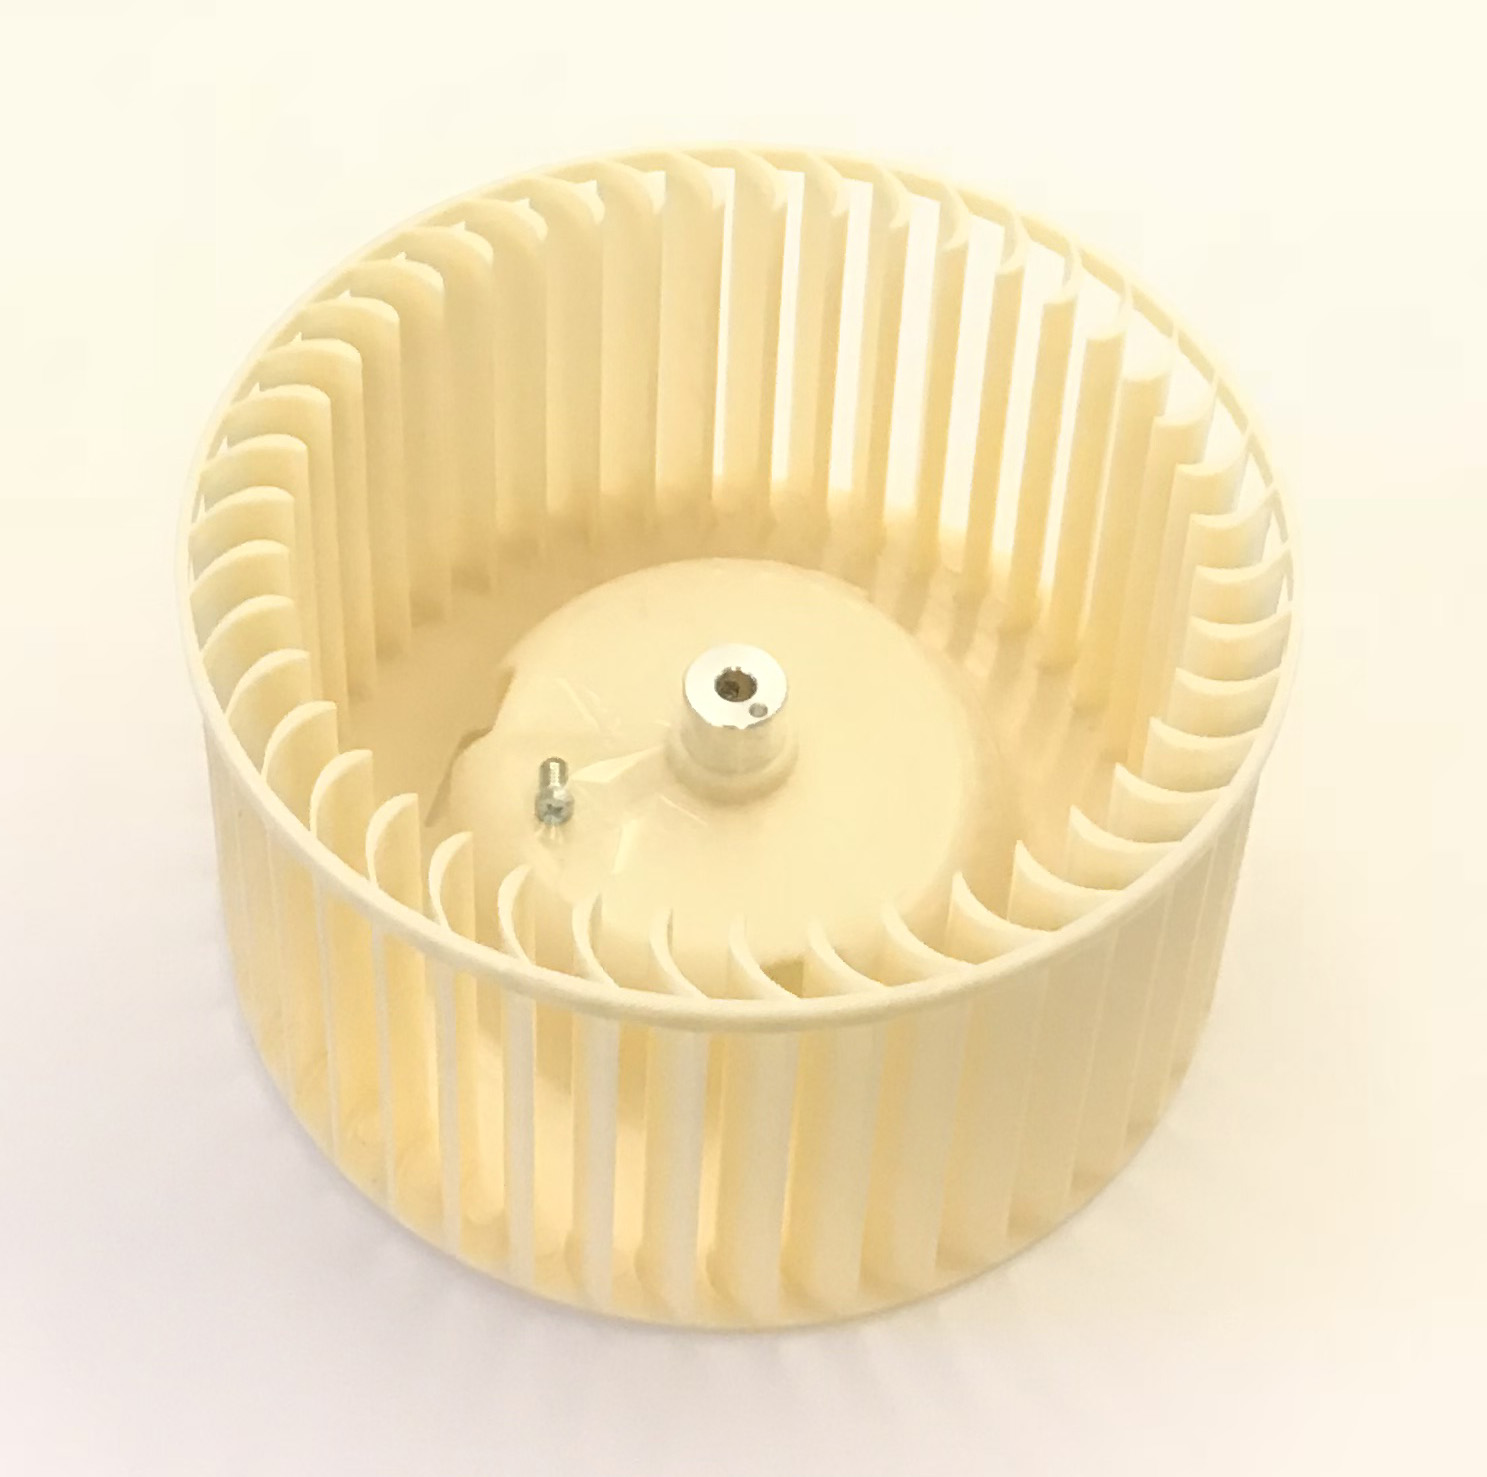 DeLONGHI OEM Delonghi Air Conditioner Blower Fan Wheel For PACAN120HPE, PACAN130HPEL